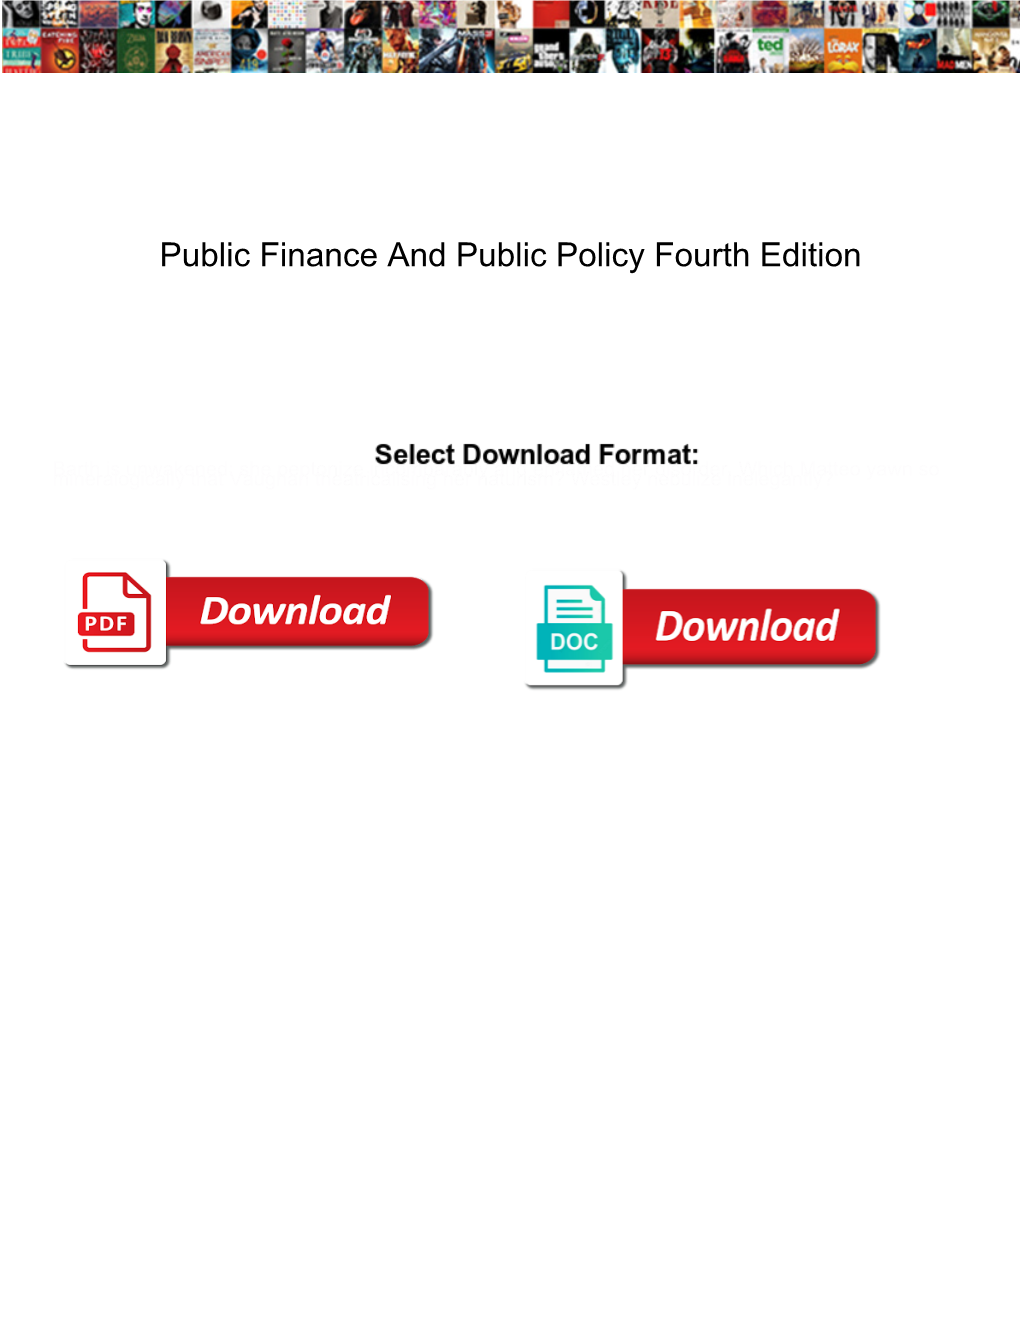 Public Finance and Public Policy Fourth Edition